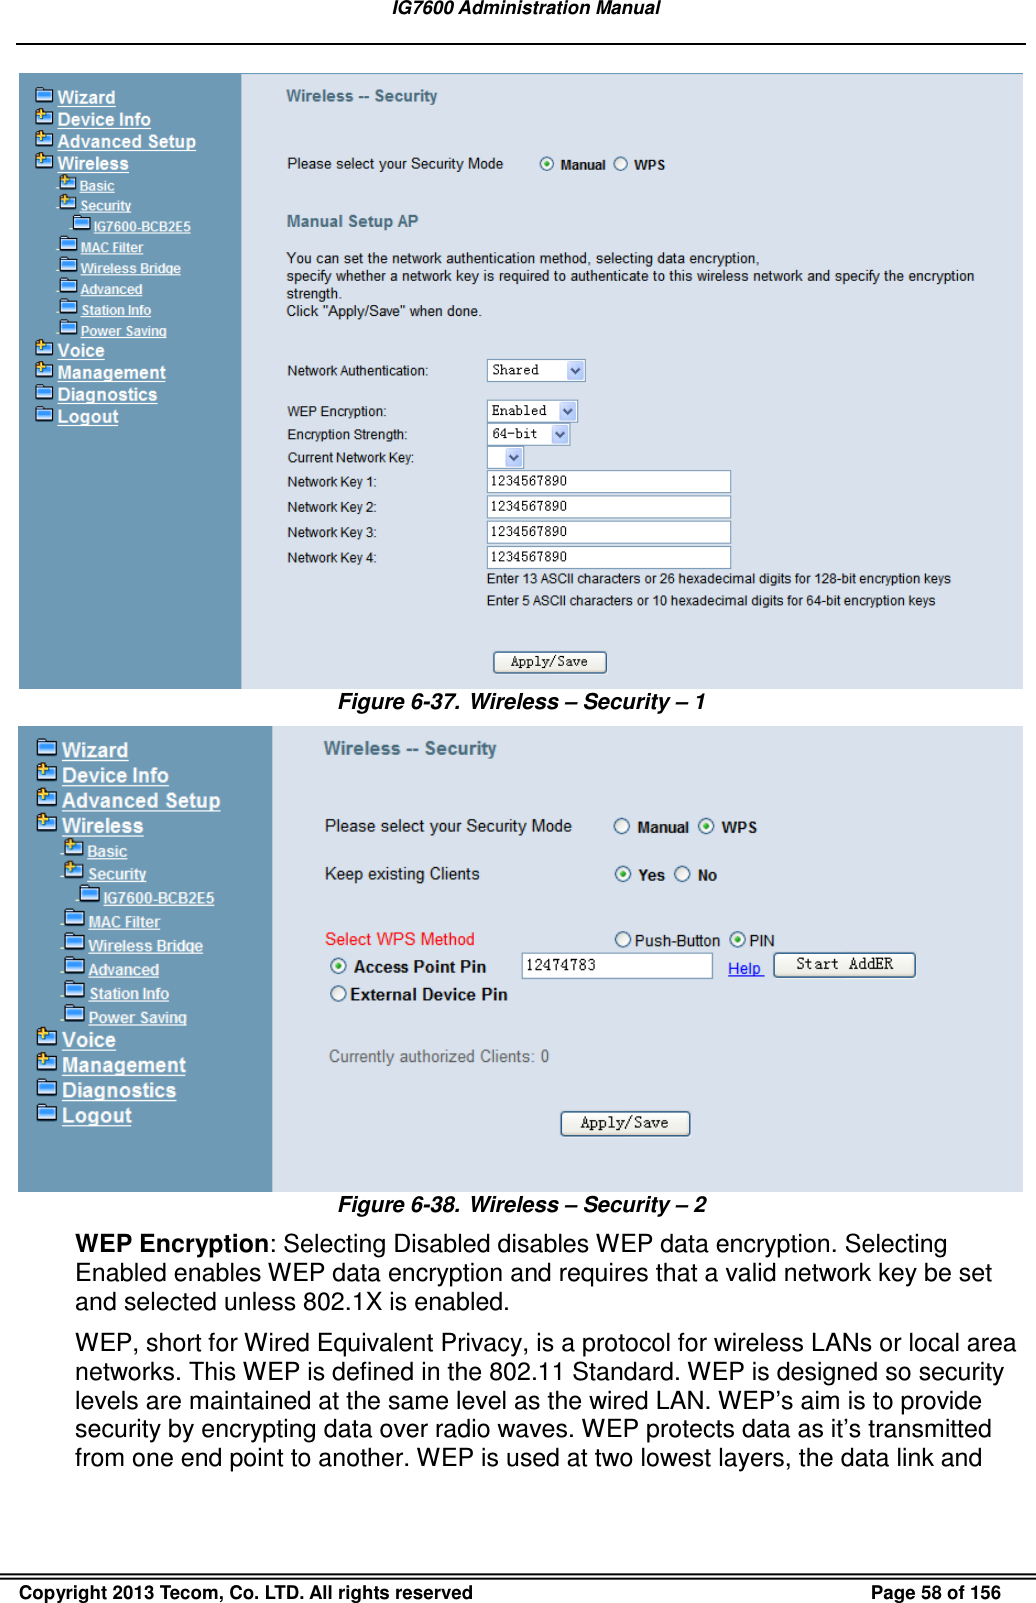   IG7600 Administration Manual  Copyright 2013 Tecom, Co. LTD. All rights reserved  Page 58 of 156  Figure 6-37.  Wireless – Security – 1  Figure 6-38.  Wireless – Security – 2   WEP Encryption: Selecting Disabled disables WEP data encryption. Selecting Enabled enables WEP data encryption and requires that a valid network key be set and selected unless 802.1X is enabled. WEP, short for Wired Equivalent Privacy, is a protocol for wireless LANs or local area networks. This WEP is defined in the 802.11 Standard. WEP is designed so security levels are maintained at the same level as the wired LAN. WEP’s aim is to provide security by encrypting data over radio waves. WEP protects data as it’s transmitted from one end point to another. WEP is used at two lowest layers, the data link and 